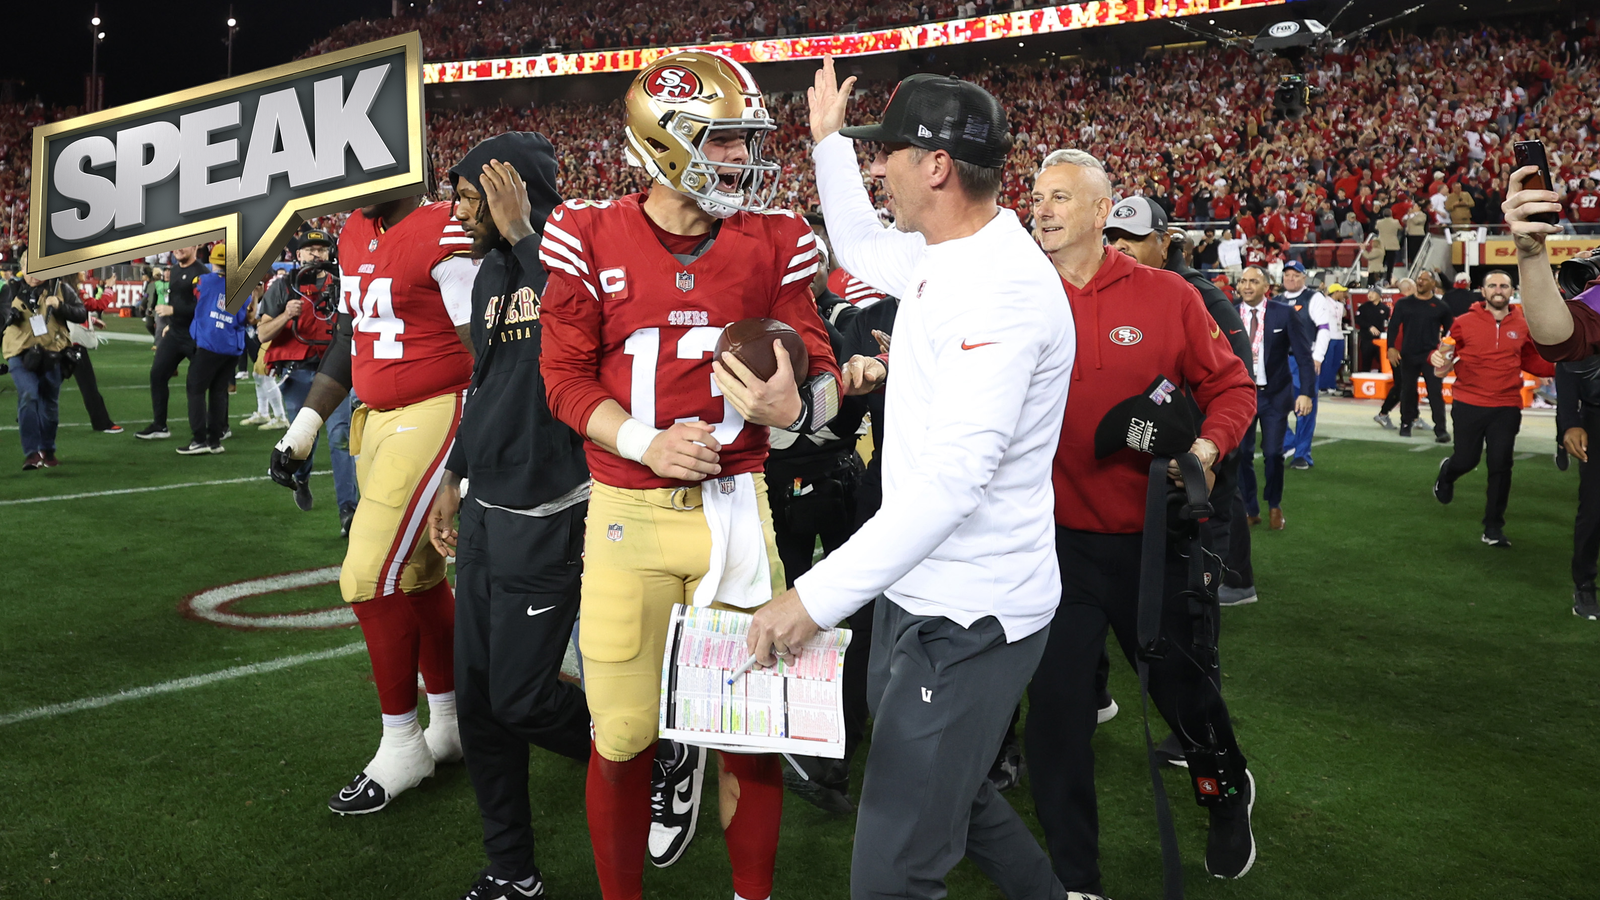 Would Purdy or Shanahan benefit more from a Super Bowl win? 